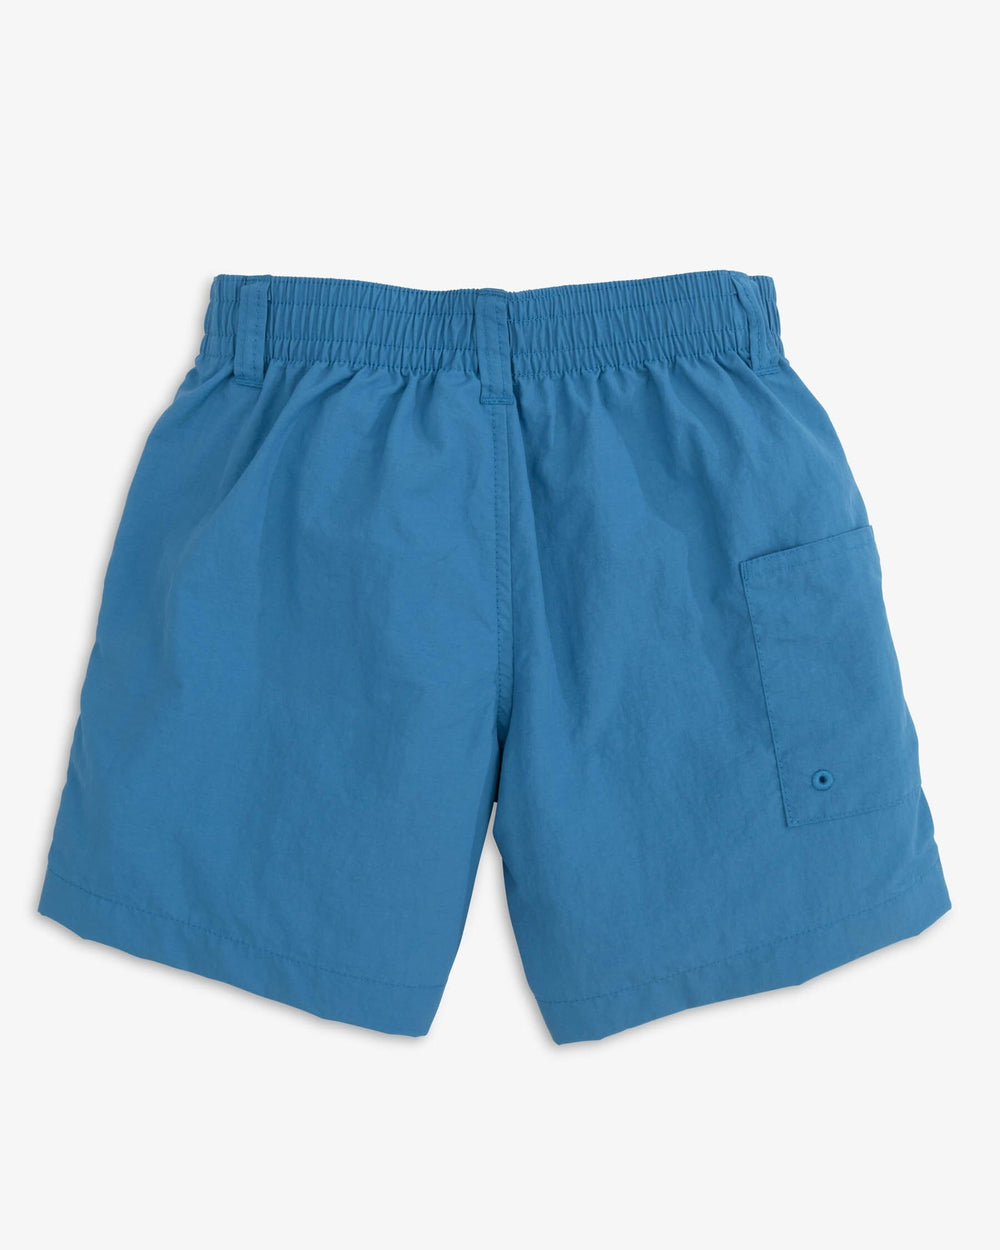 The back view of the Southern Tide Boys Shoreline Active Short by Southern Tide - Atlantic Blue